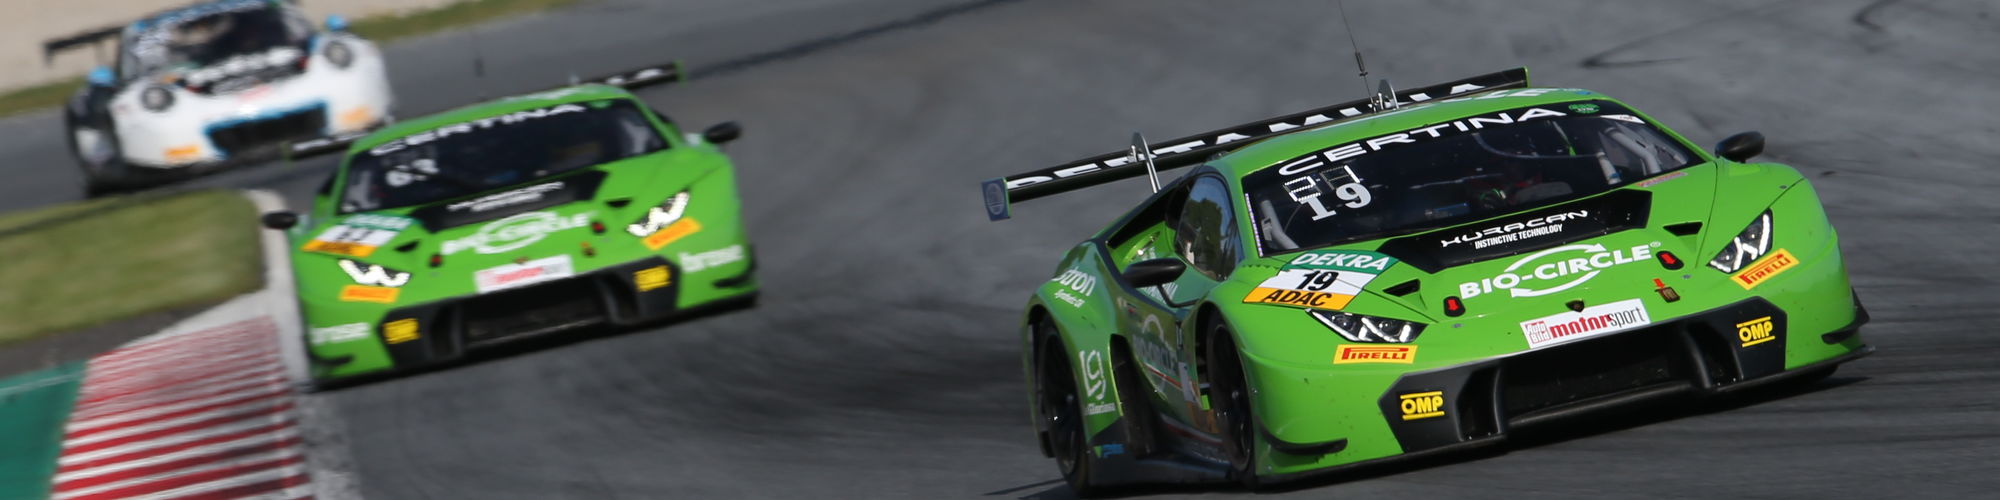 Grasser Racing Team cover image